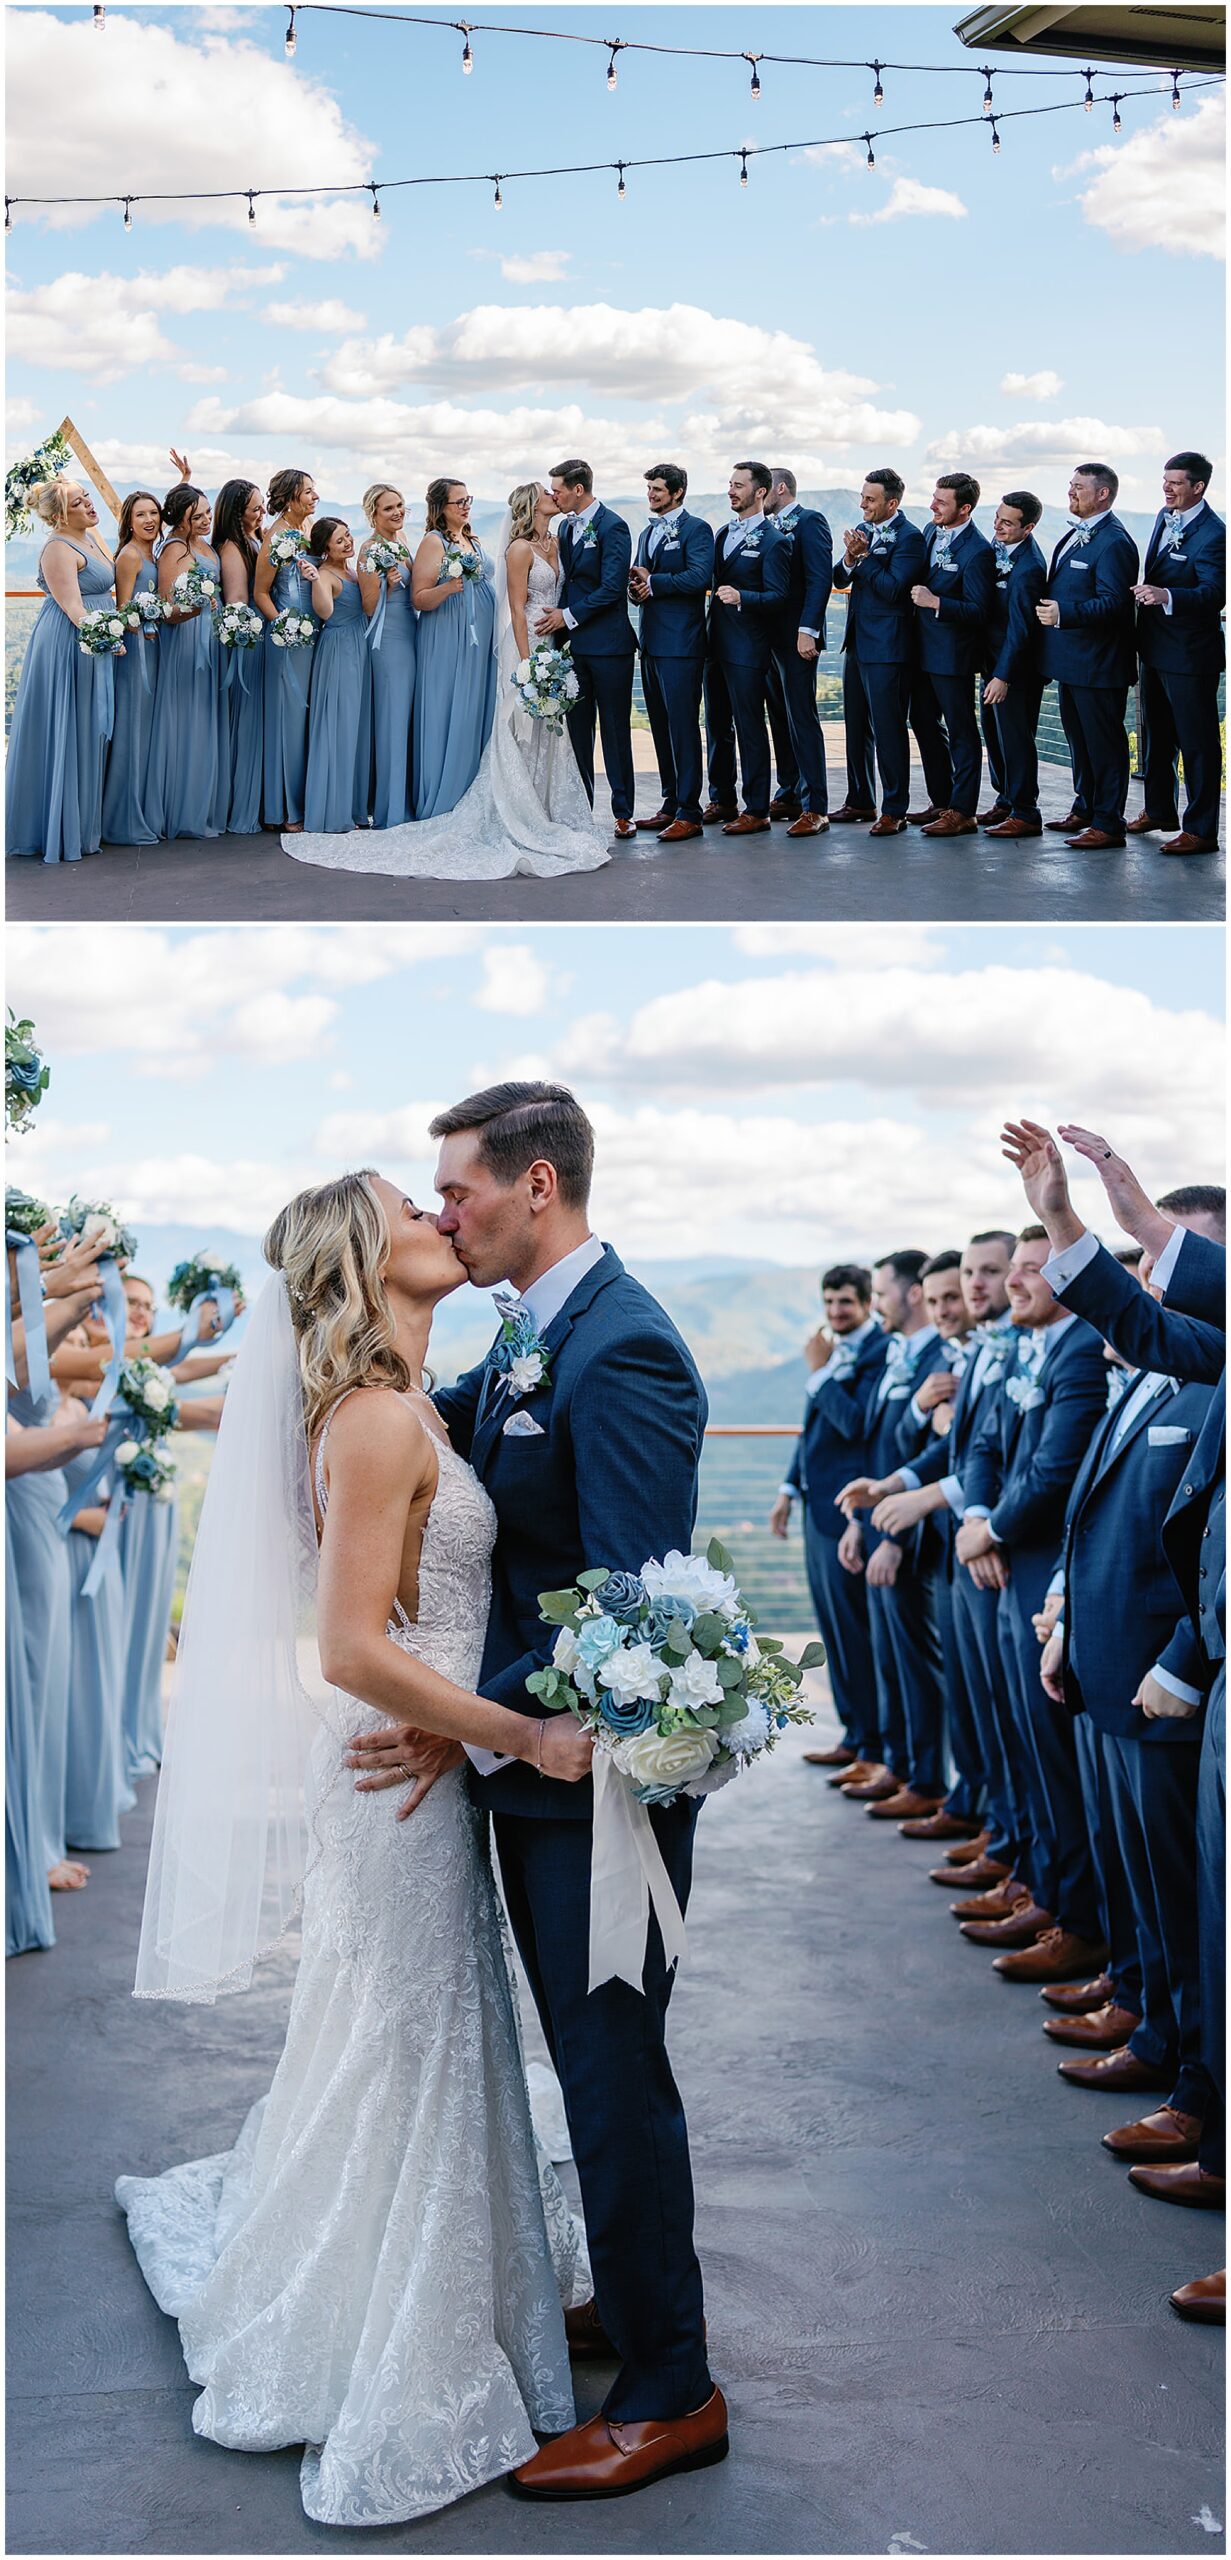 Newlyweds kiss while standing on an outdoor patio surrounded by their large wedding party